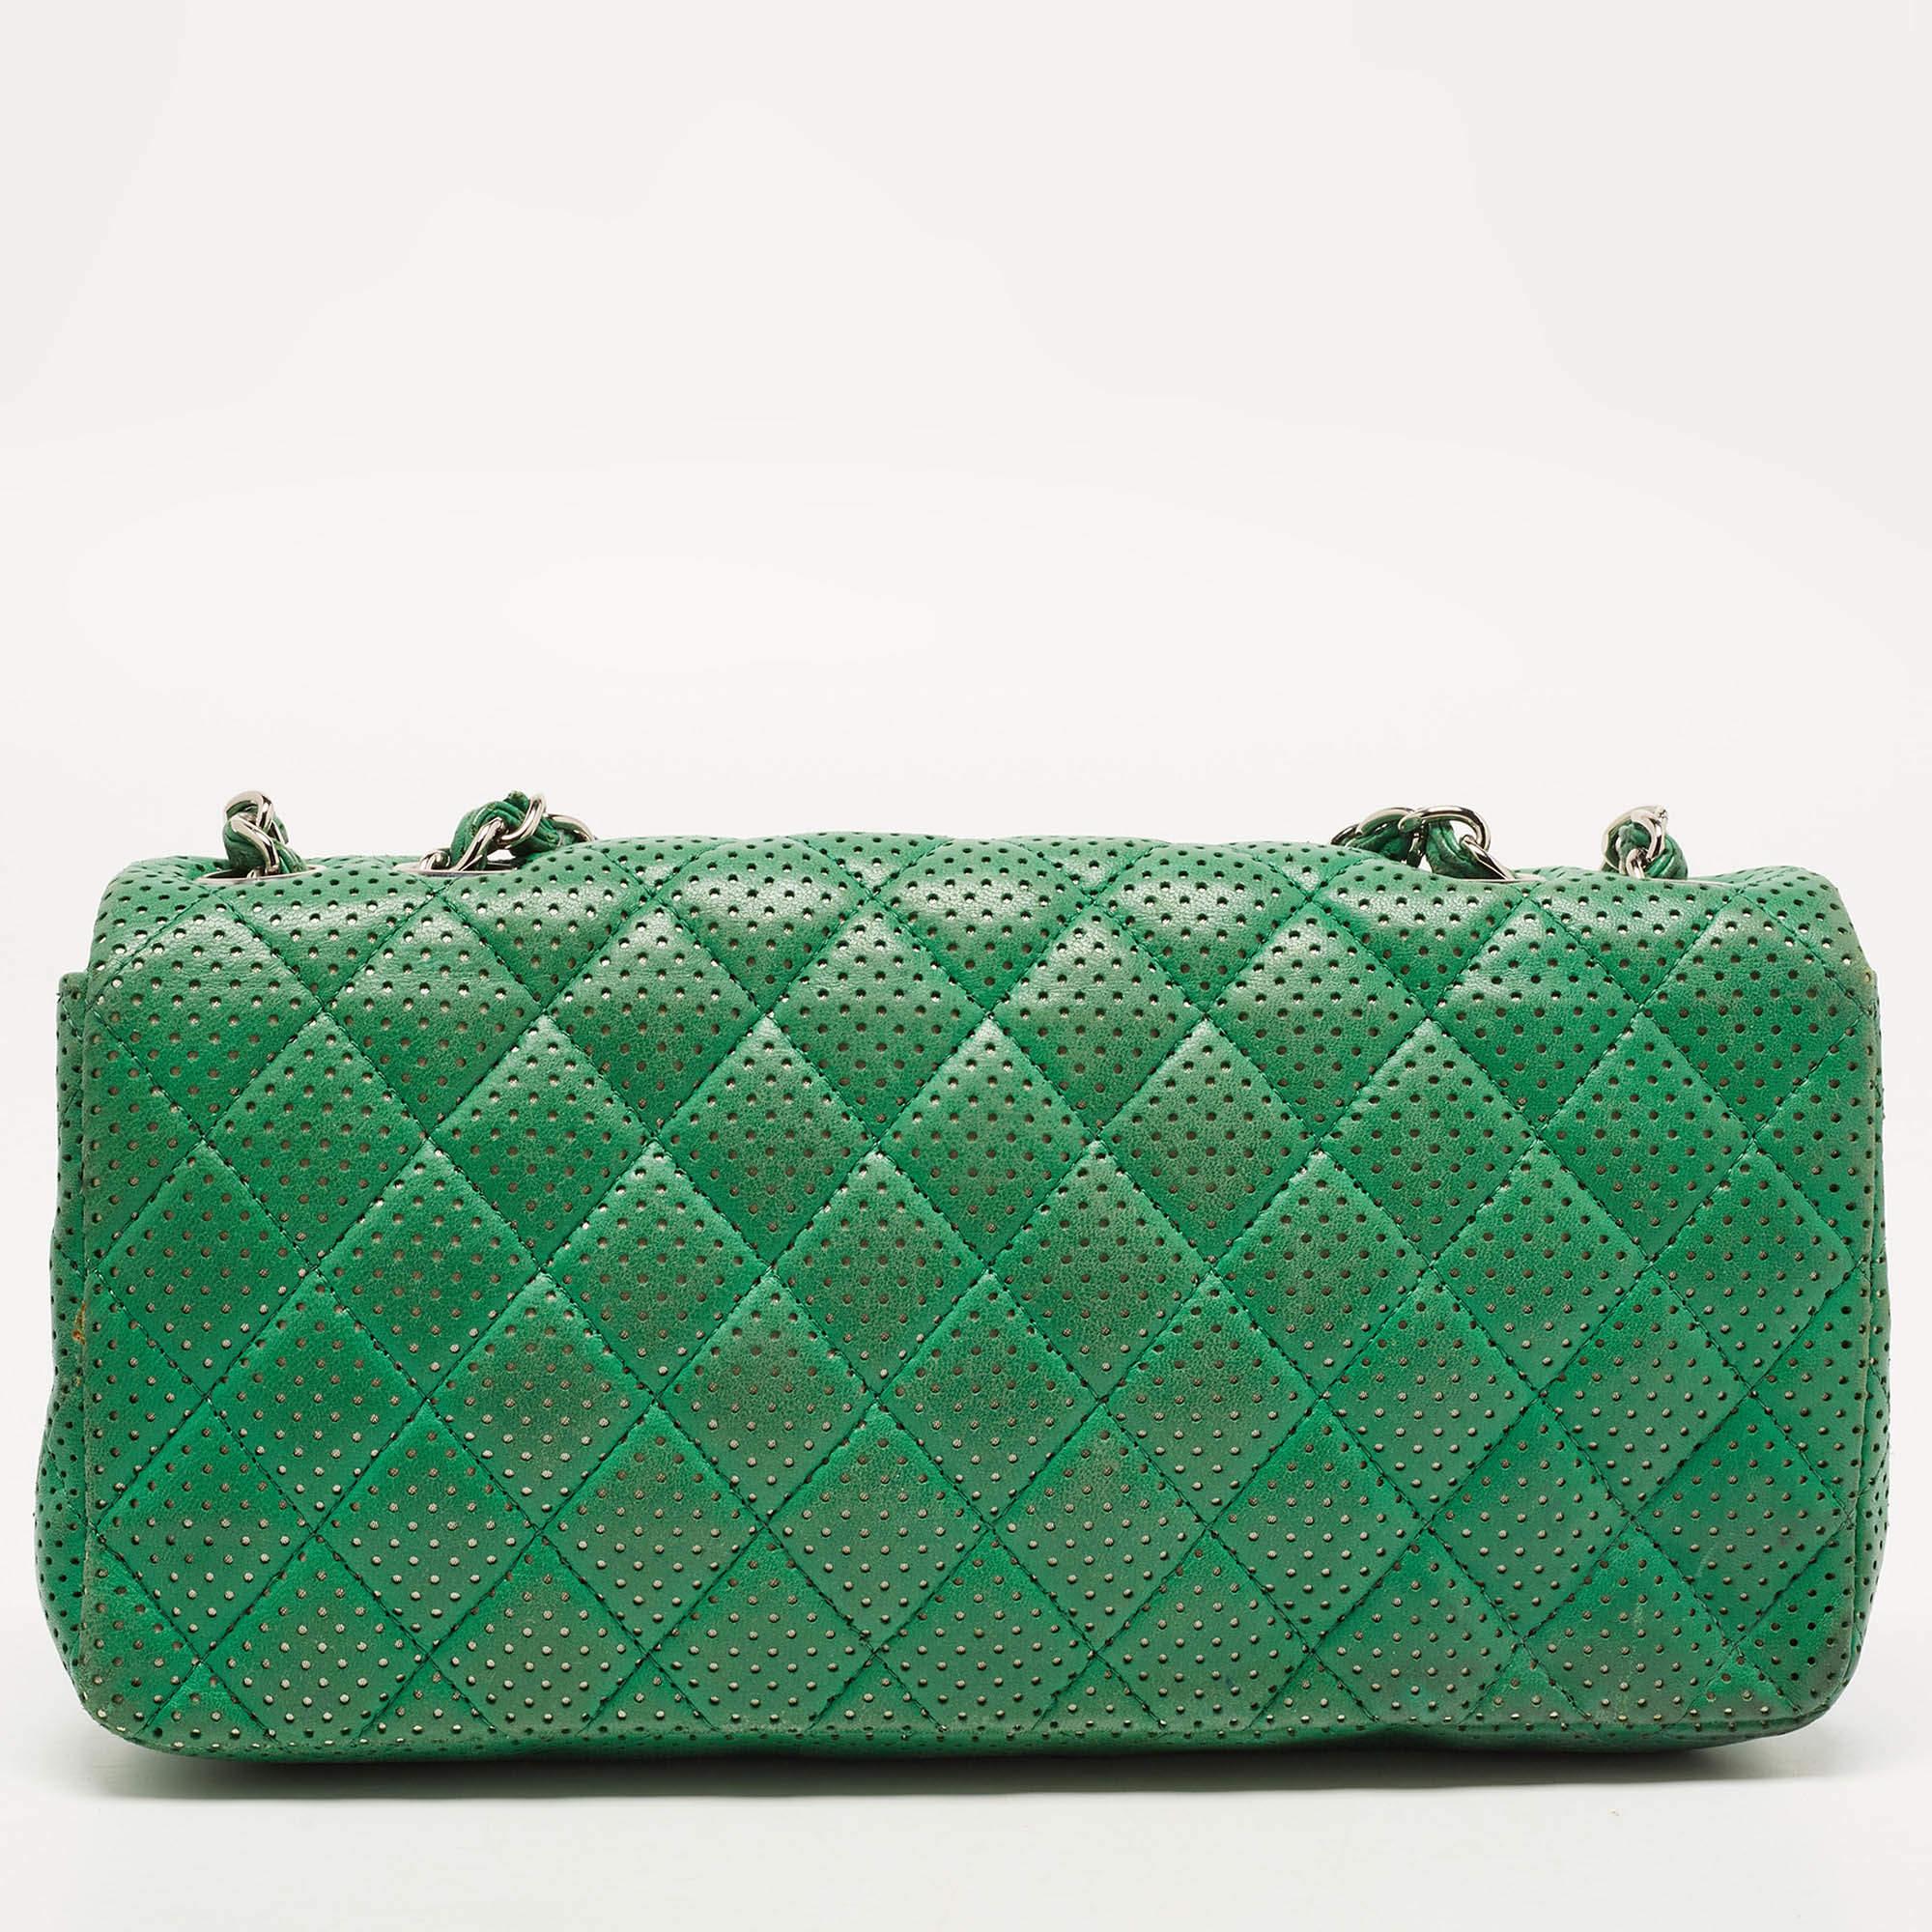 Chanel Green Quilted Perforated Leather East/West Classic Flap Bag 8